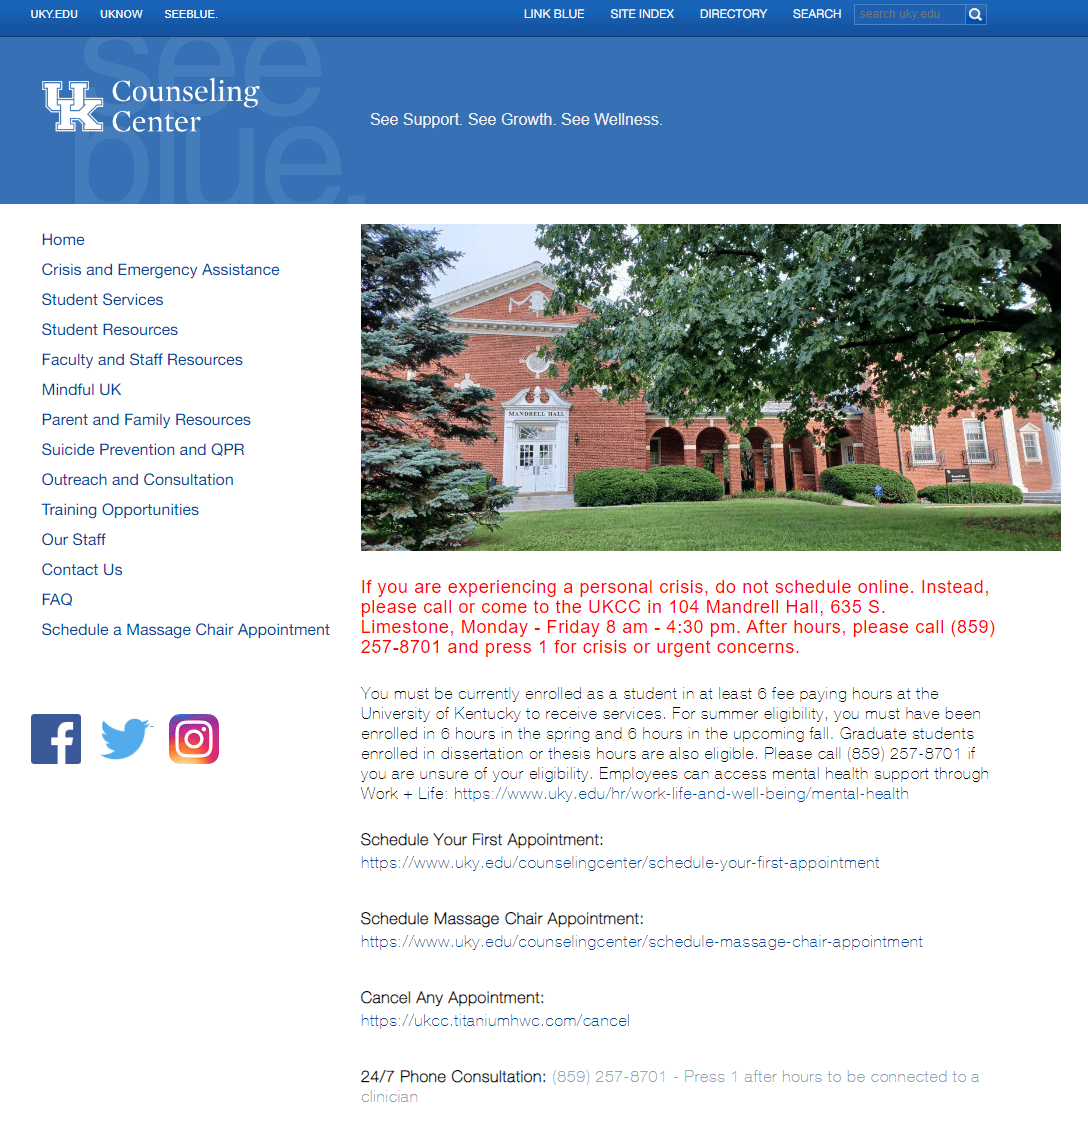 UK Counseling Center web page image with assistance options